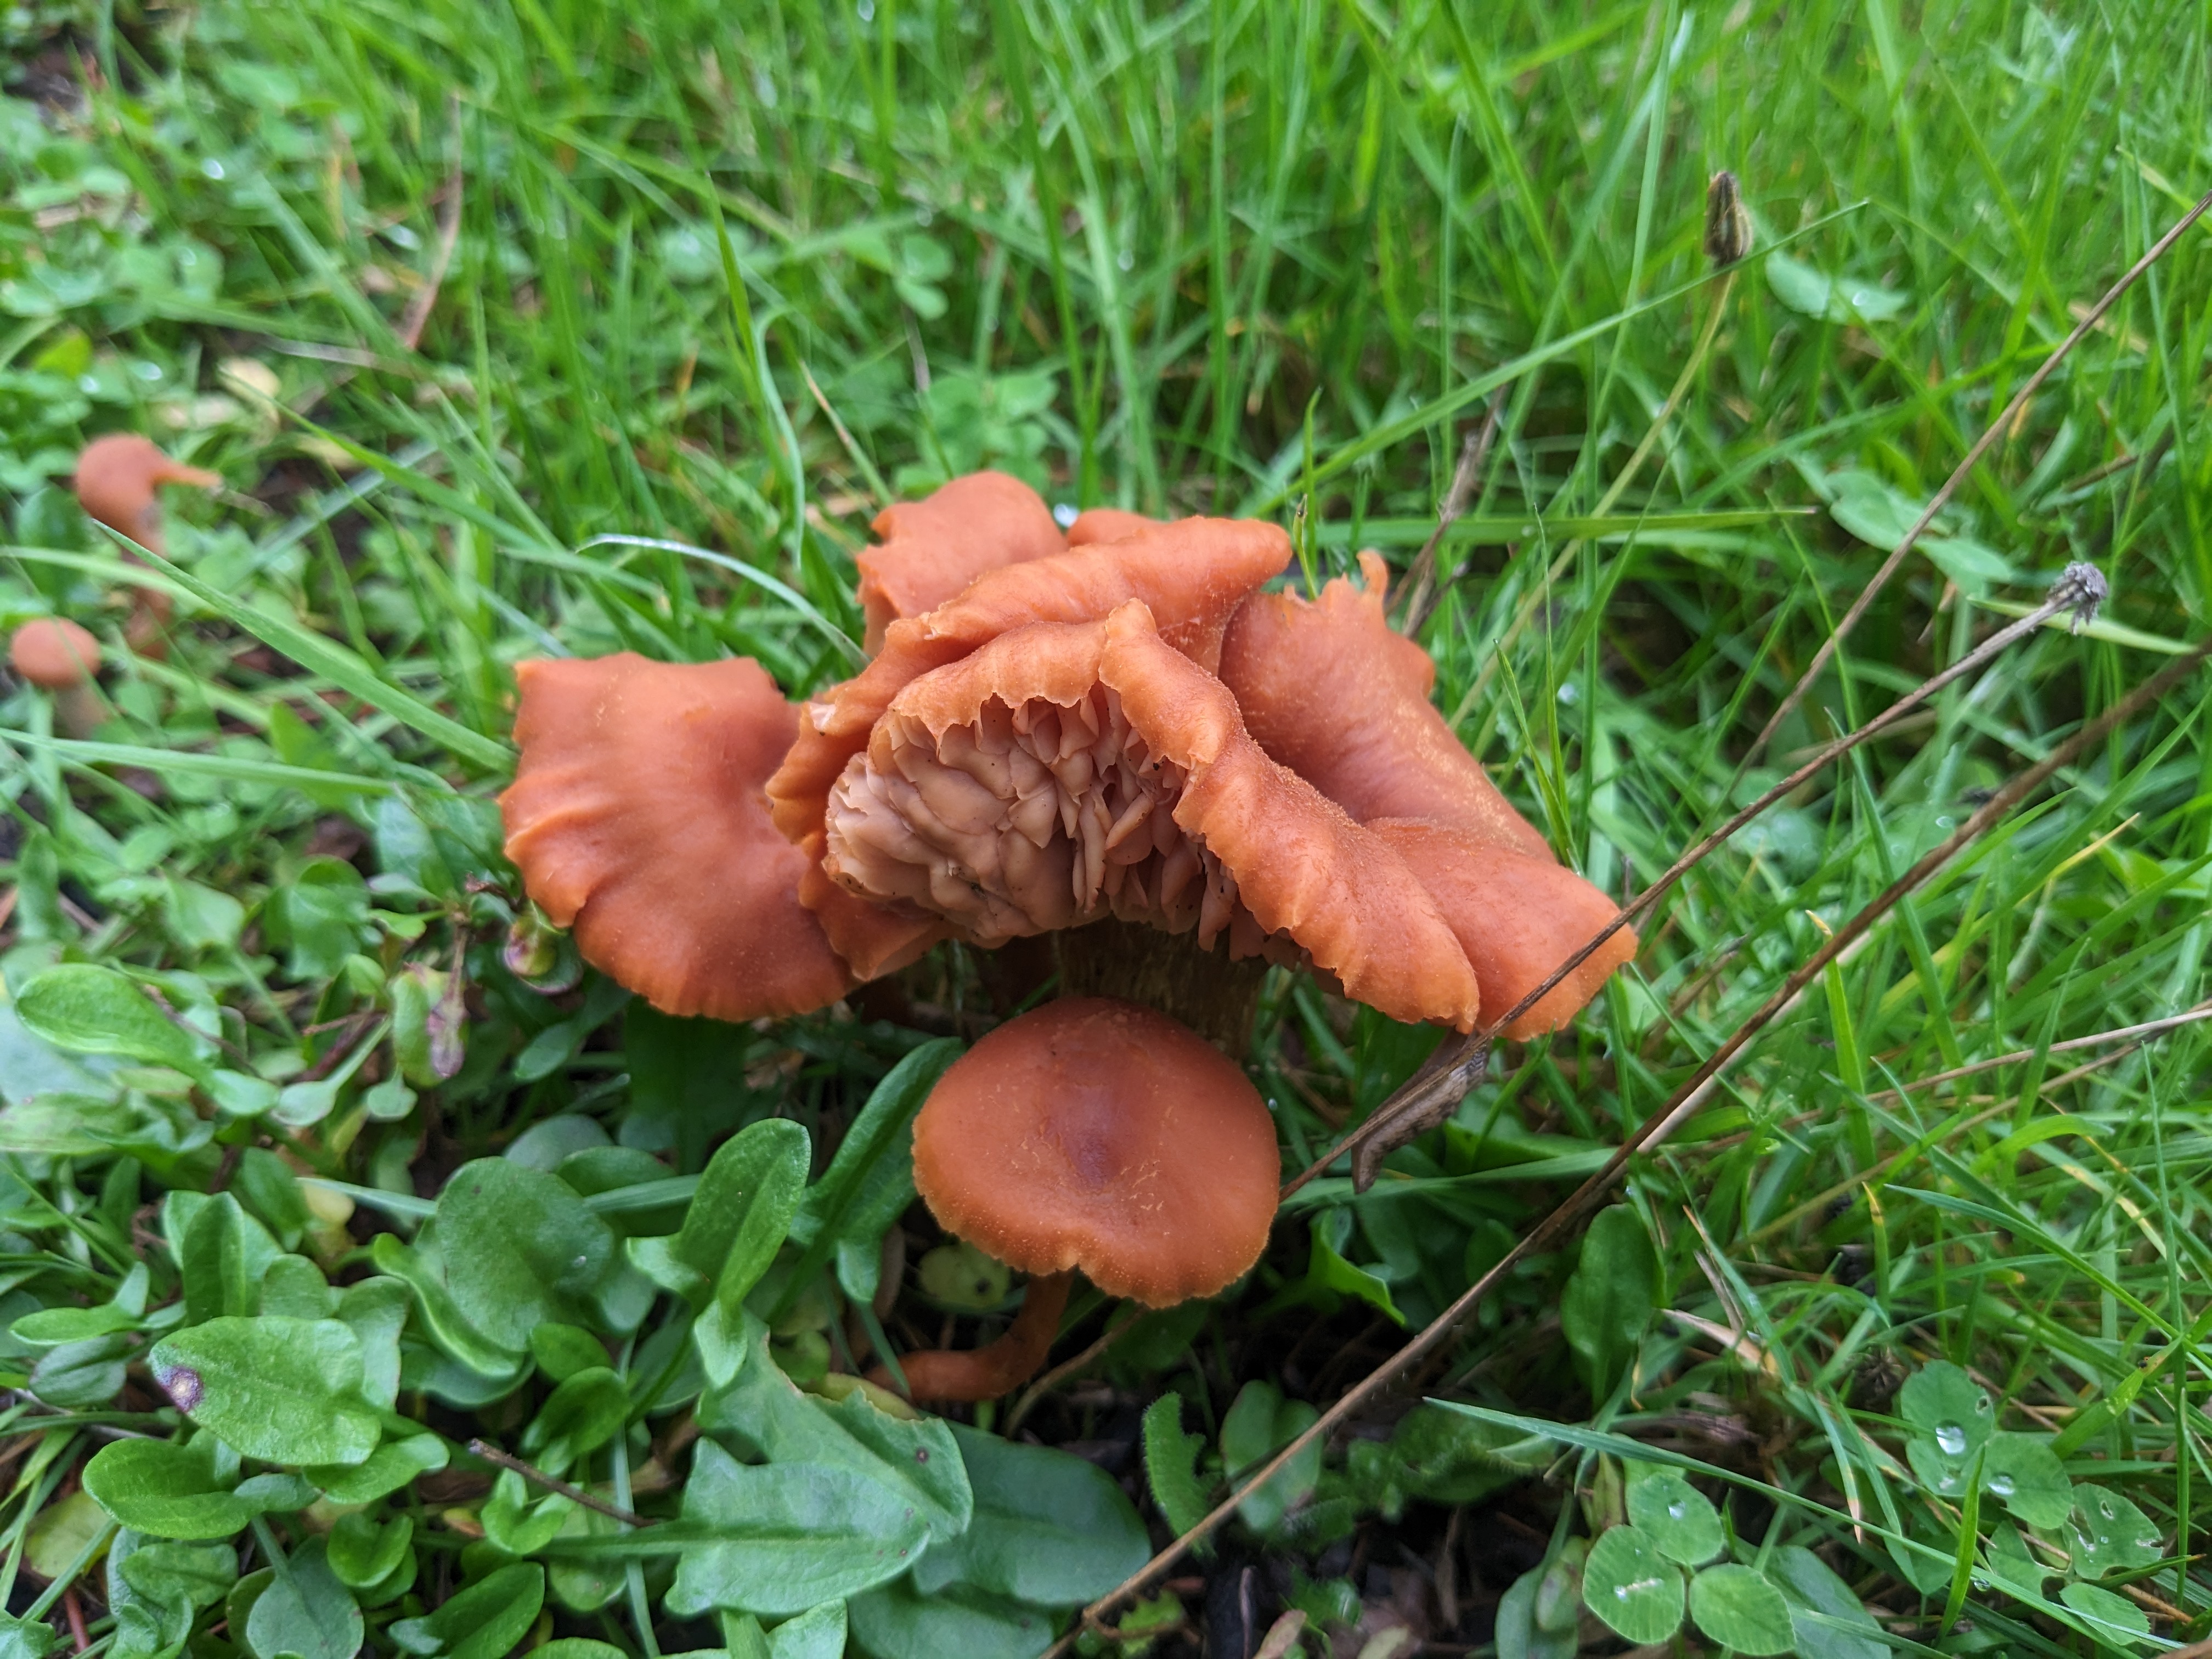 Picture unrelated to post. Some crinkly brown-orange mushrooms in vibrant green grass.